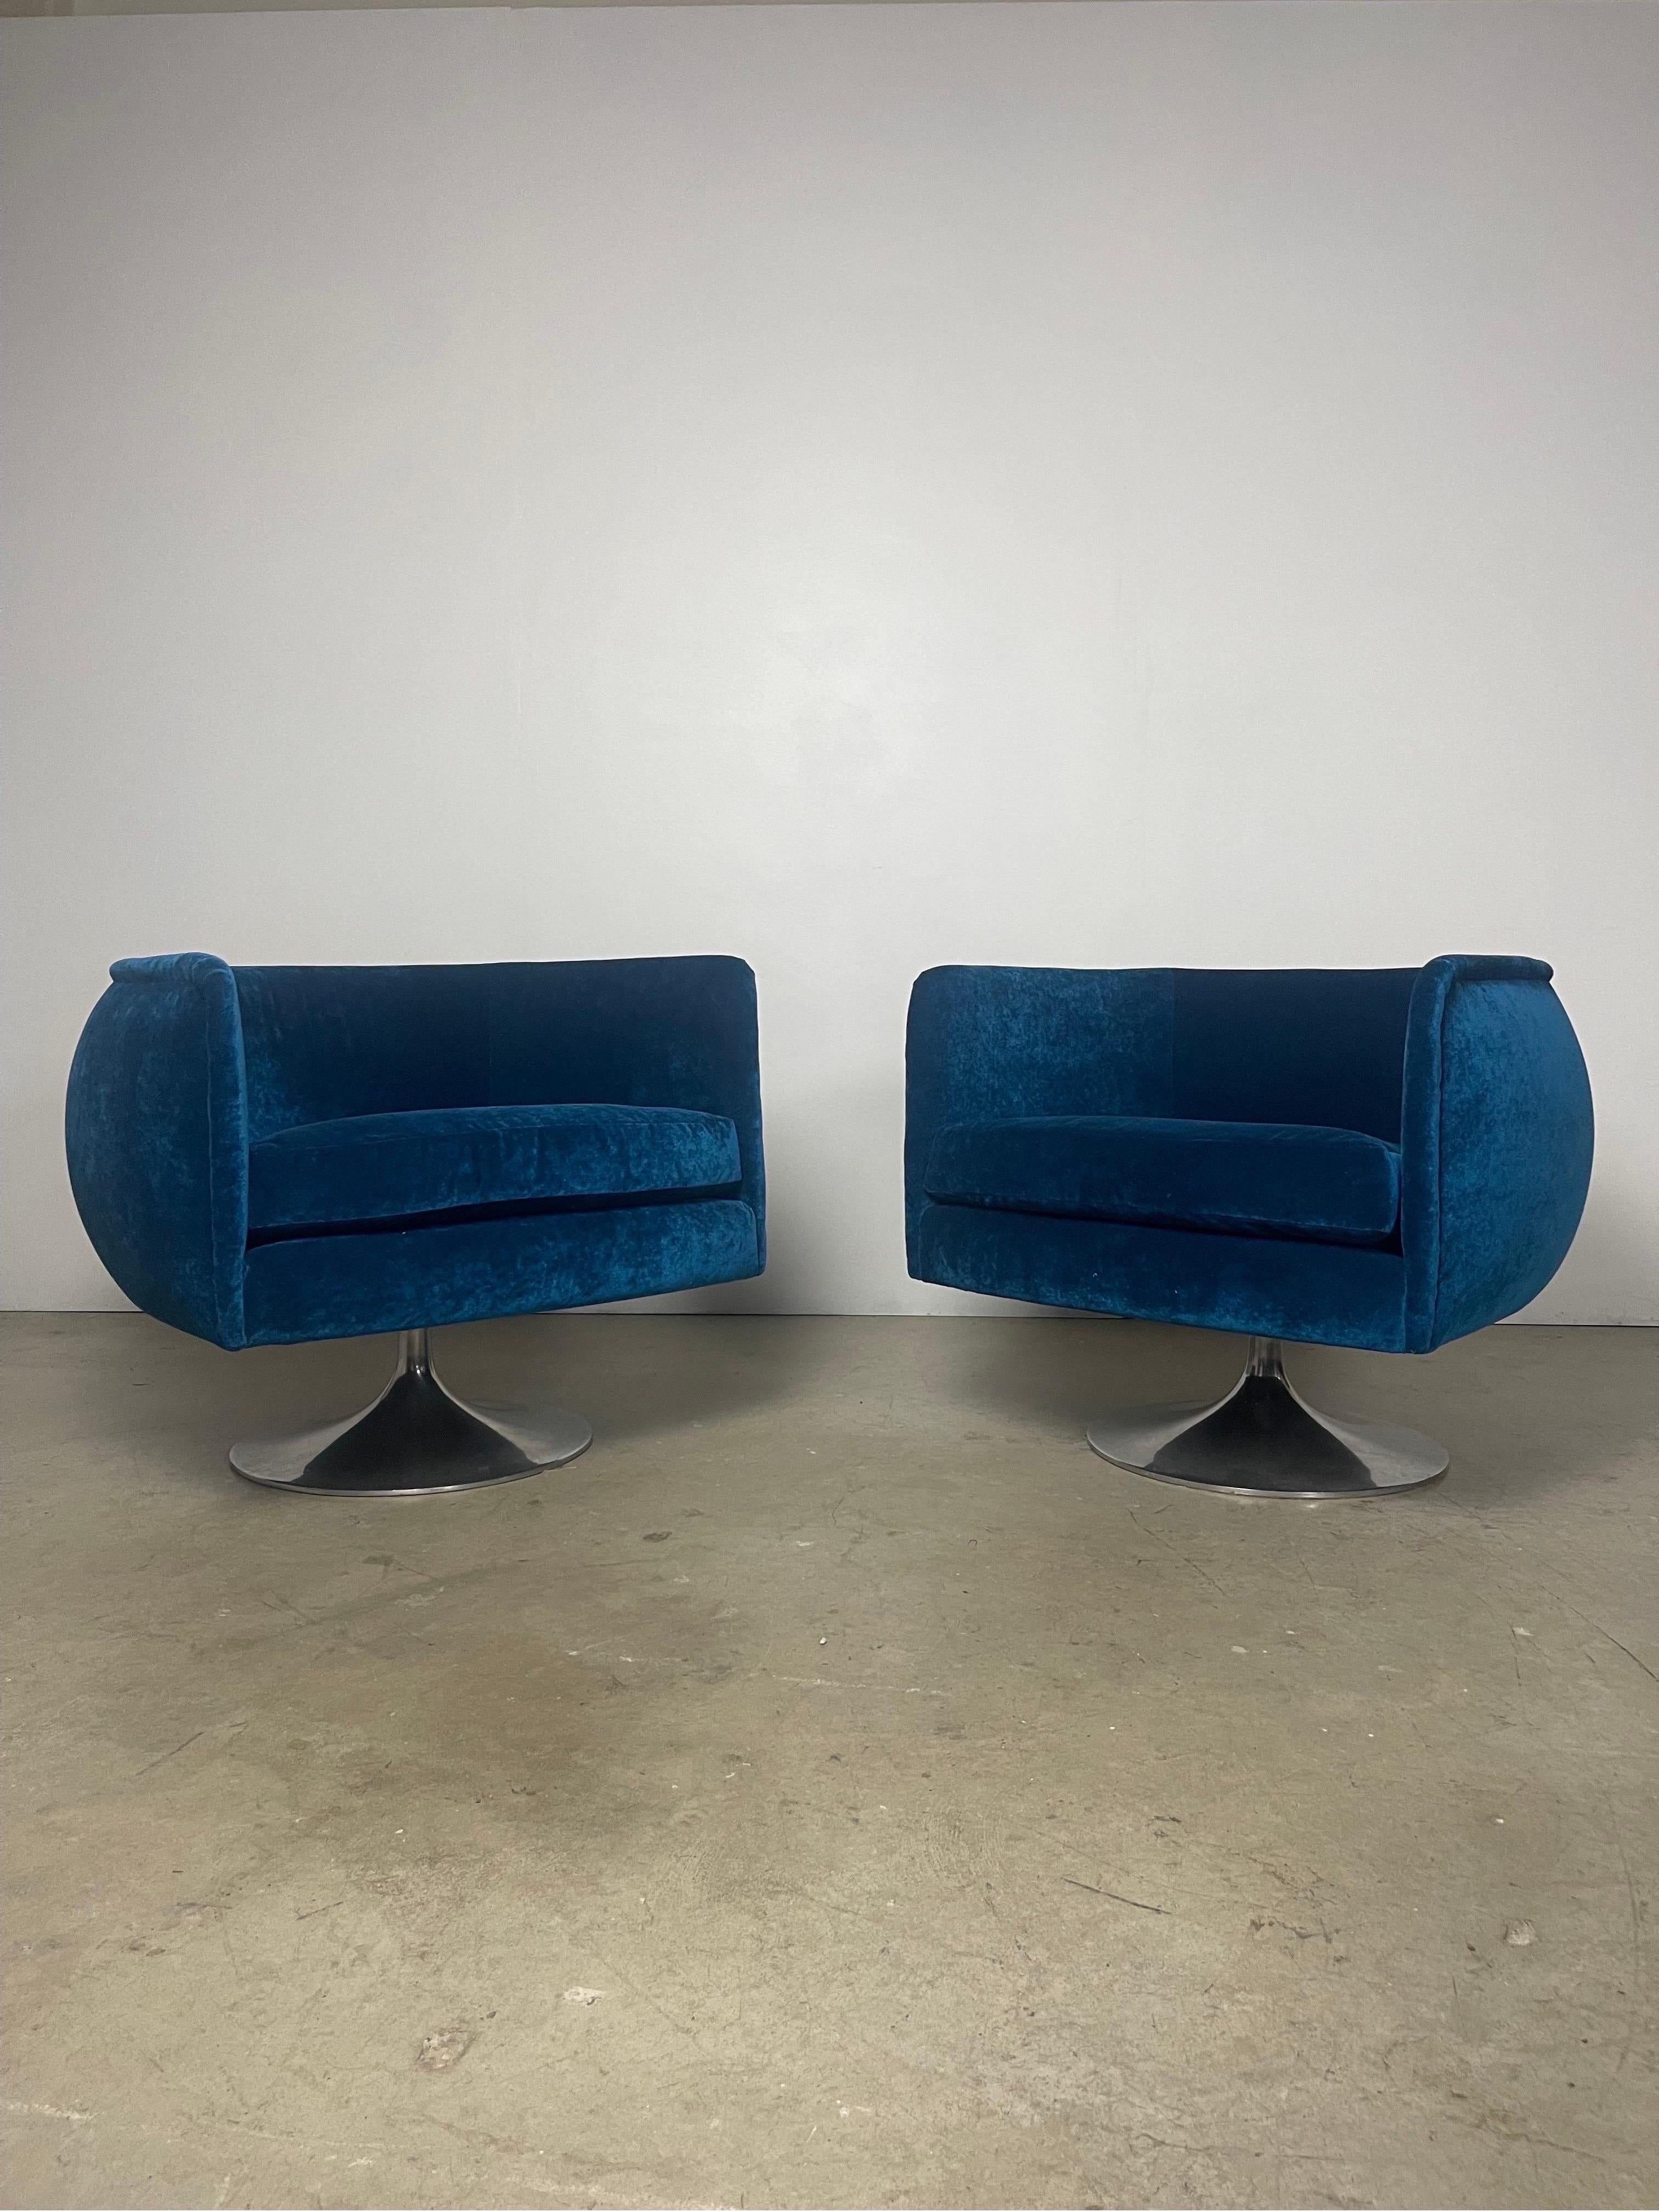 Set of two chairs manufactured by Knoll and designed by Joe D’Urso. Upholstered in blue velvet. Minor wear to the steel swivel bases. Upholstery is in great condition, completely restored. 